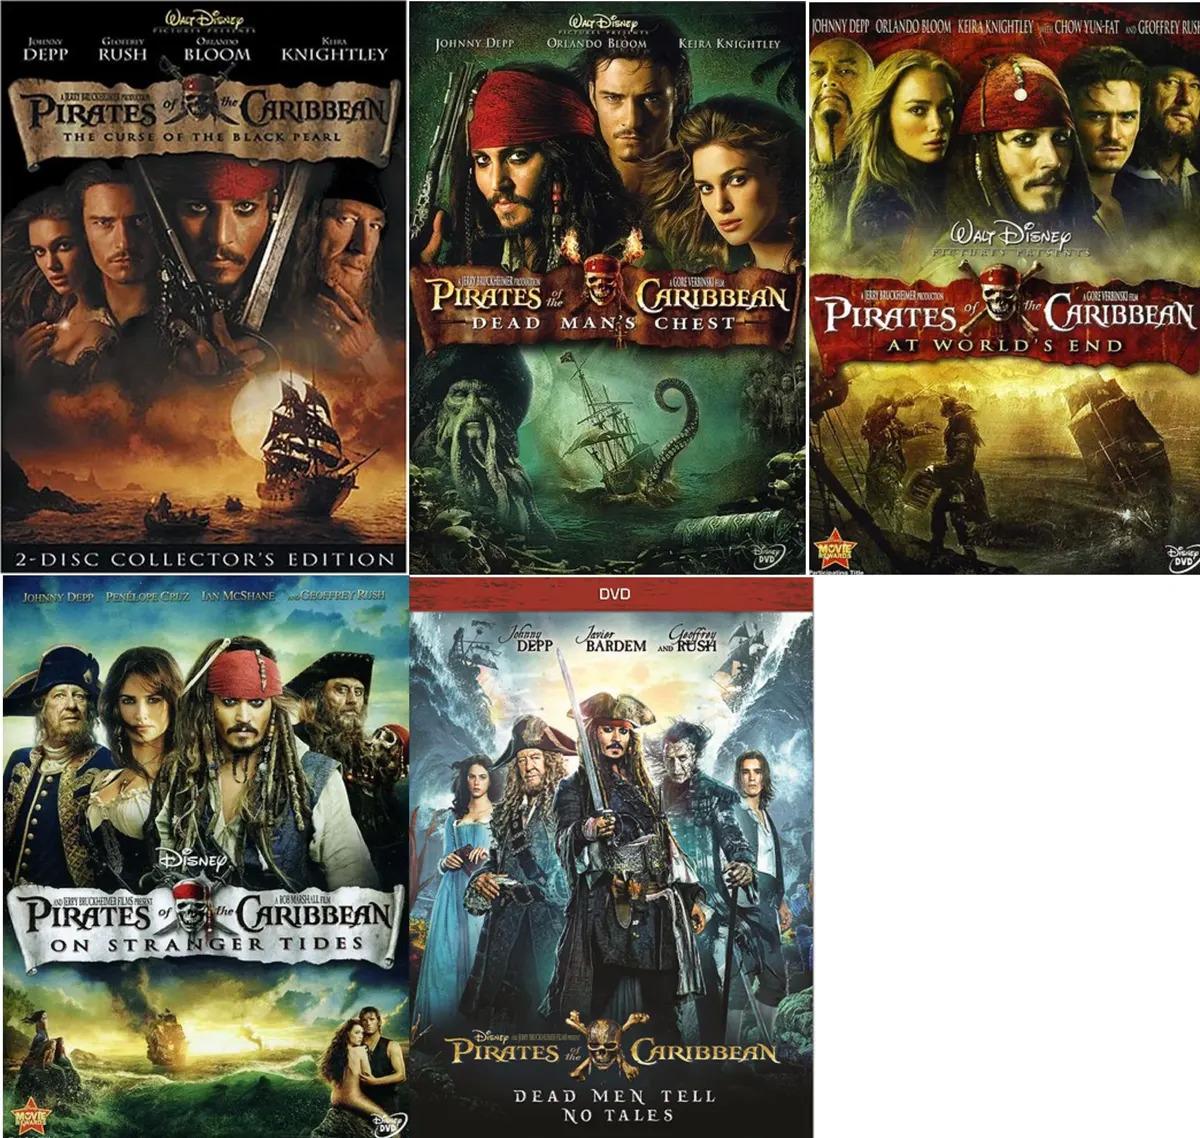 Pirates of the Caribbean 1-5 Film Collection for $19.99